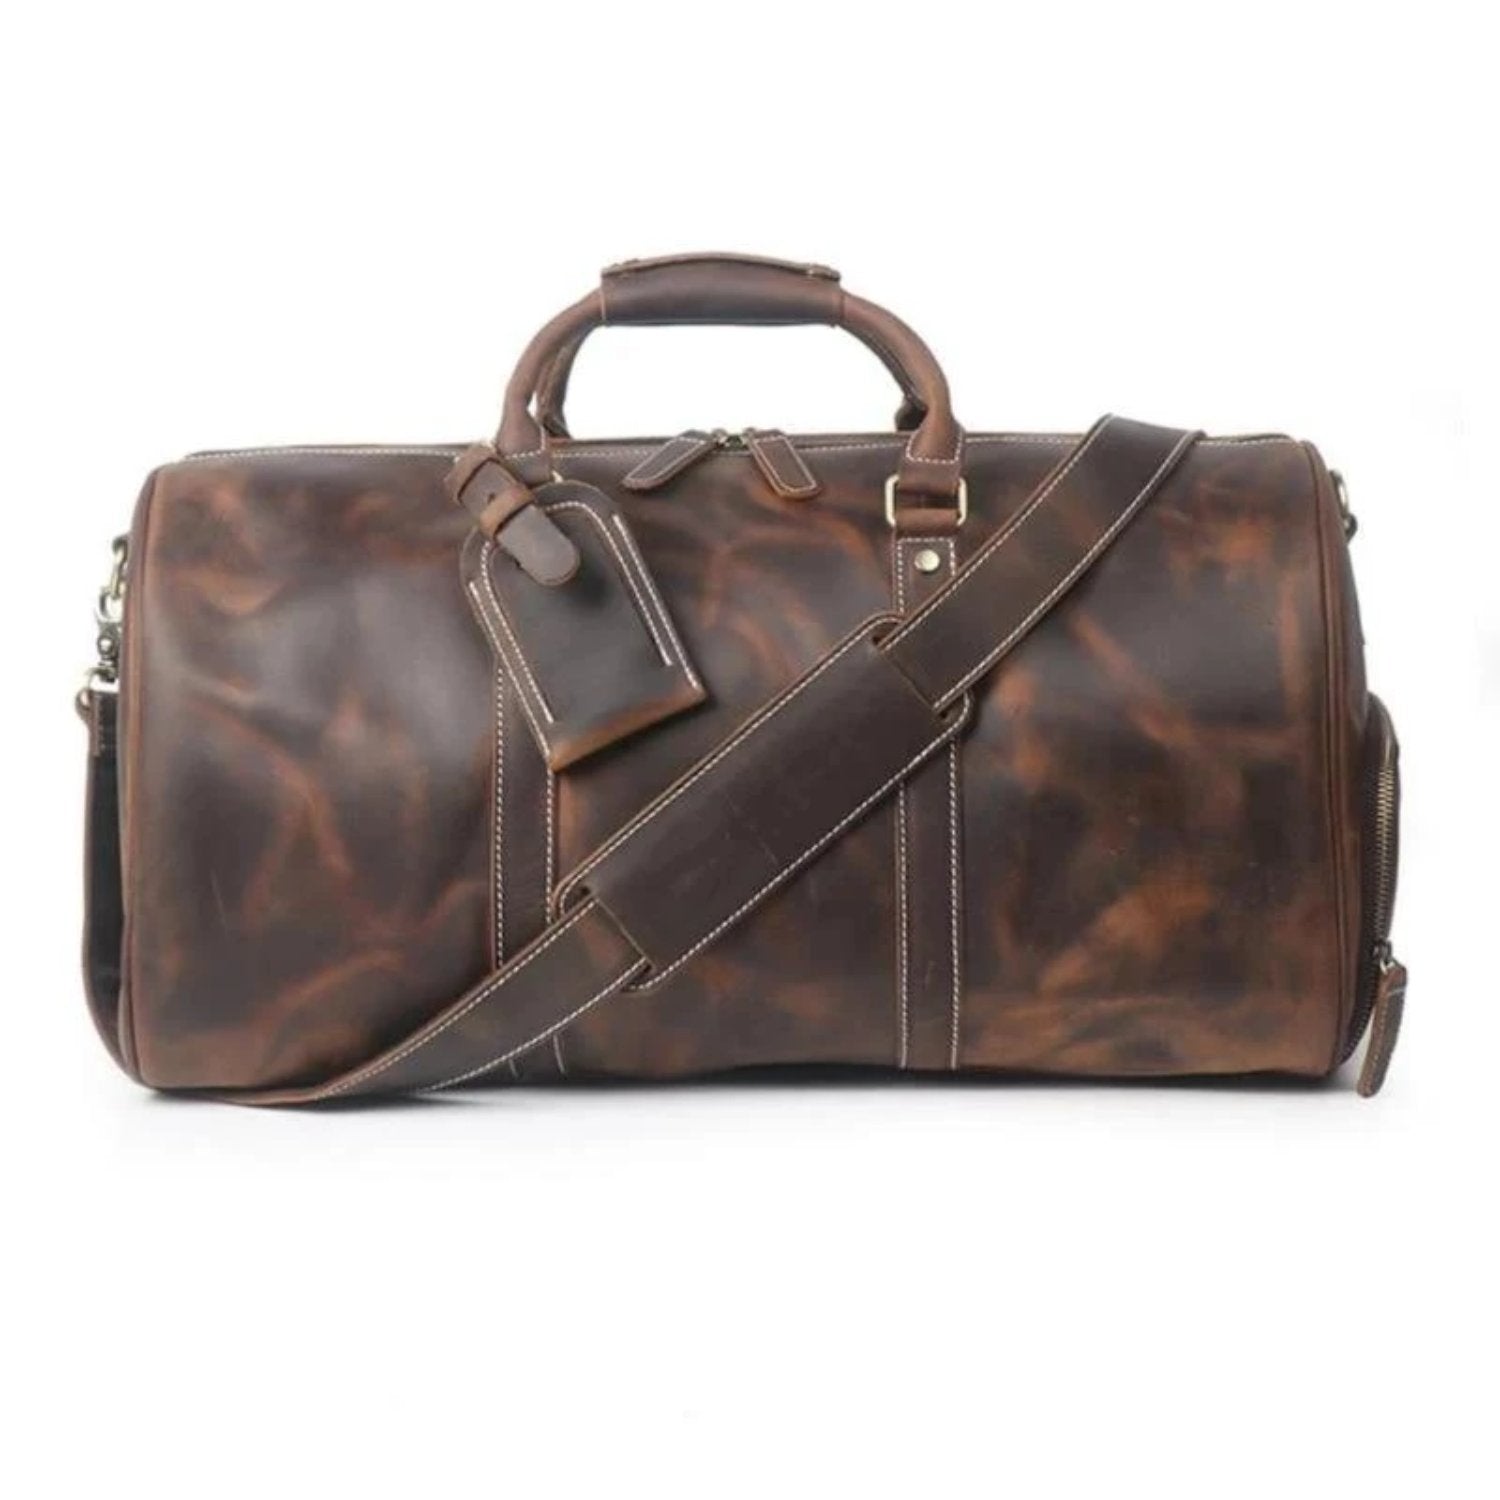 Carry On Guide  Leather Duffel Bag, Mens Leather Carry On Luggage